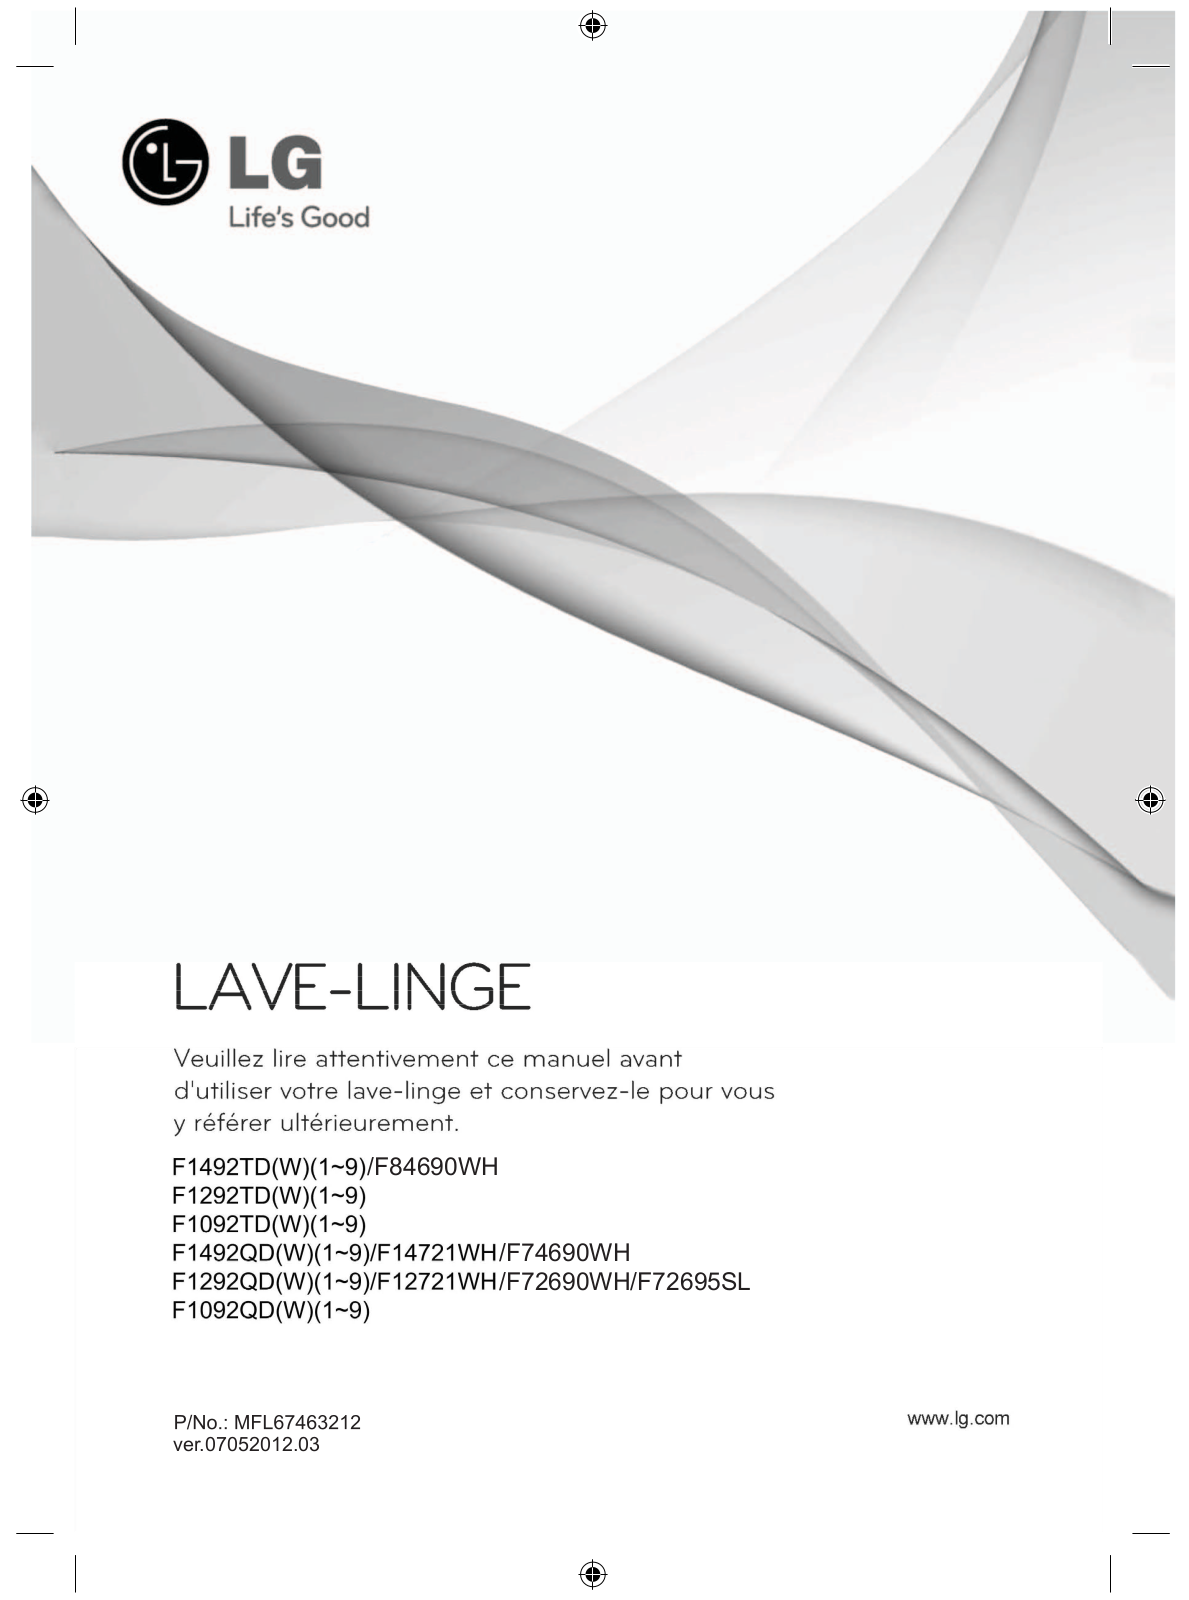 LG F82691WH, F74690 WH User Manual